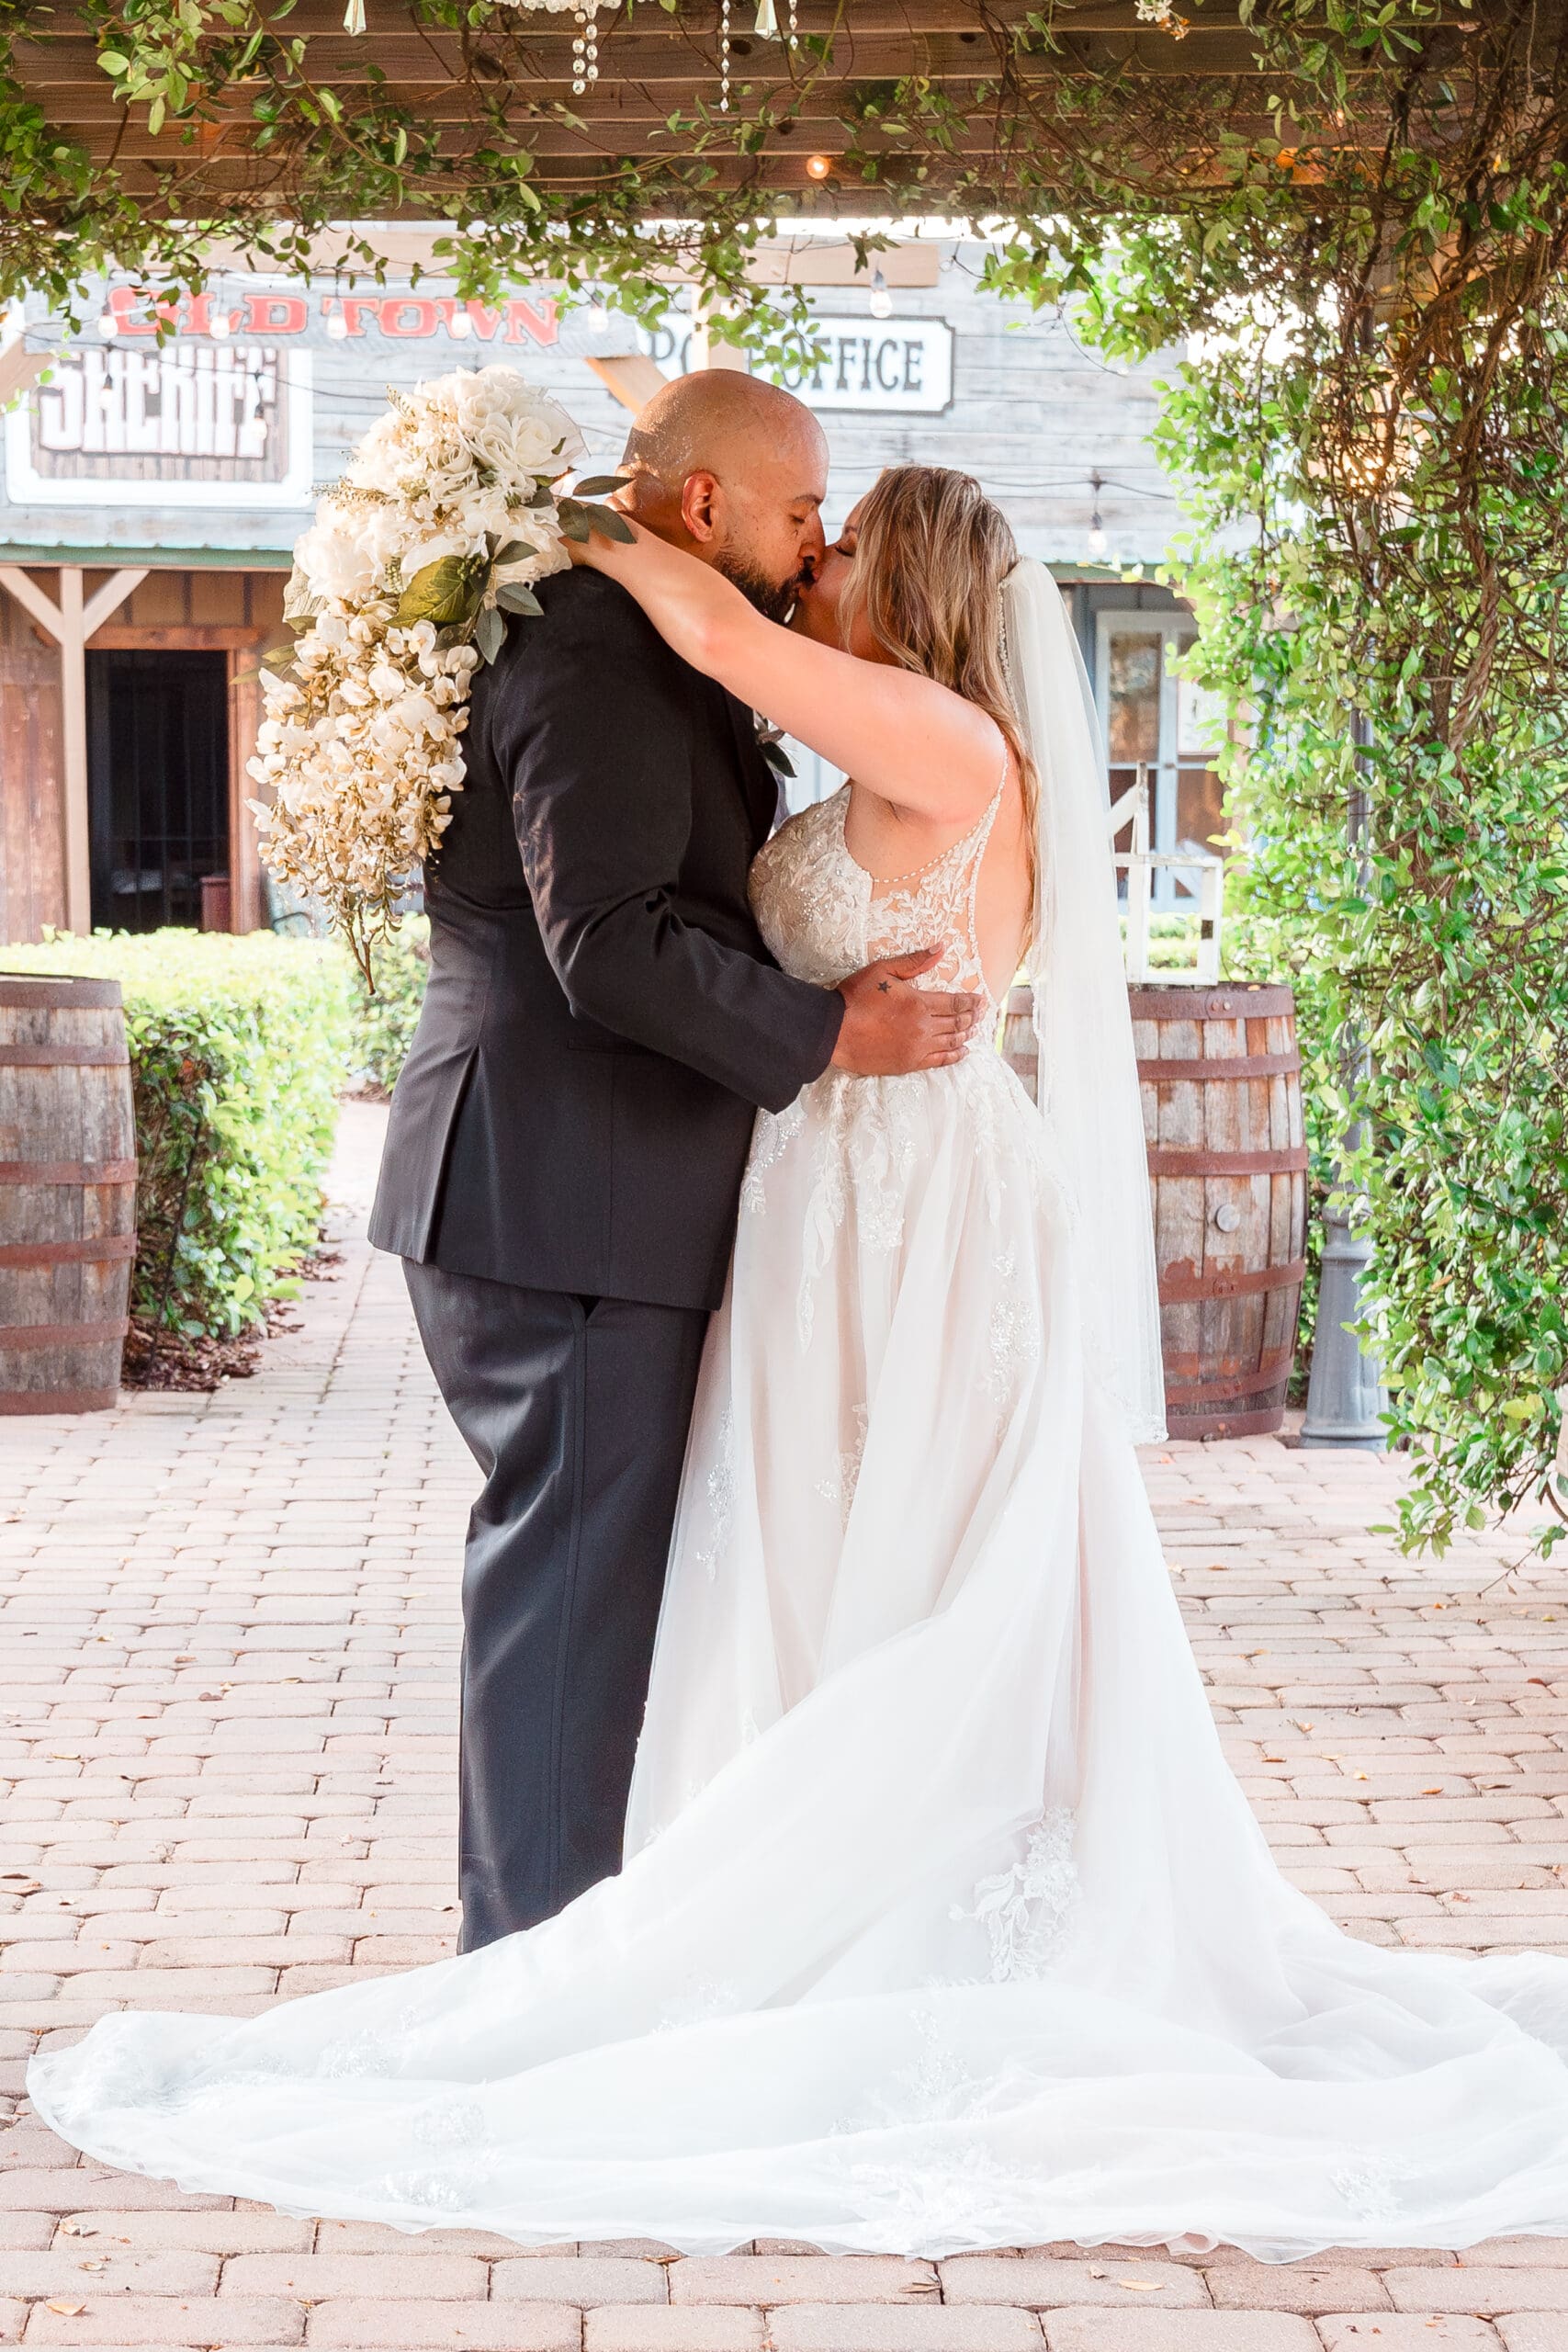 Jerzy Nieves Photography - Romantic moment captured as the bride and groom share a tender kiss, expressing their love and happiness at All Inclusive Weddings Orlando